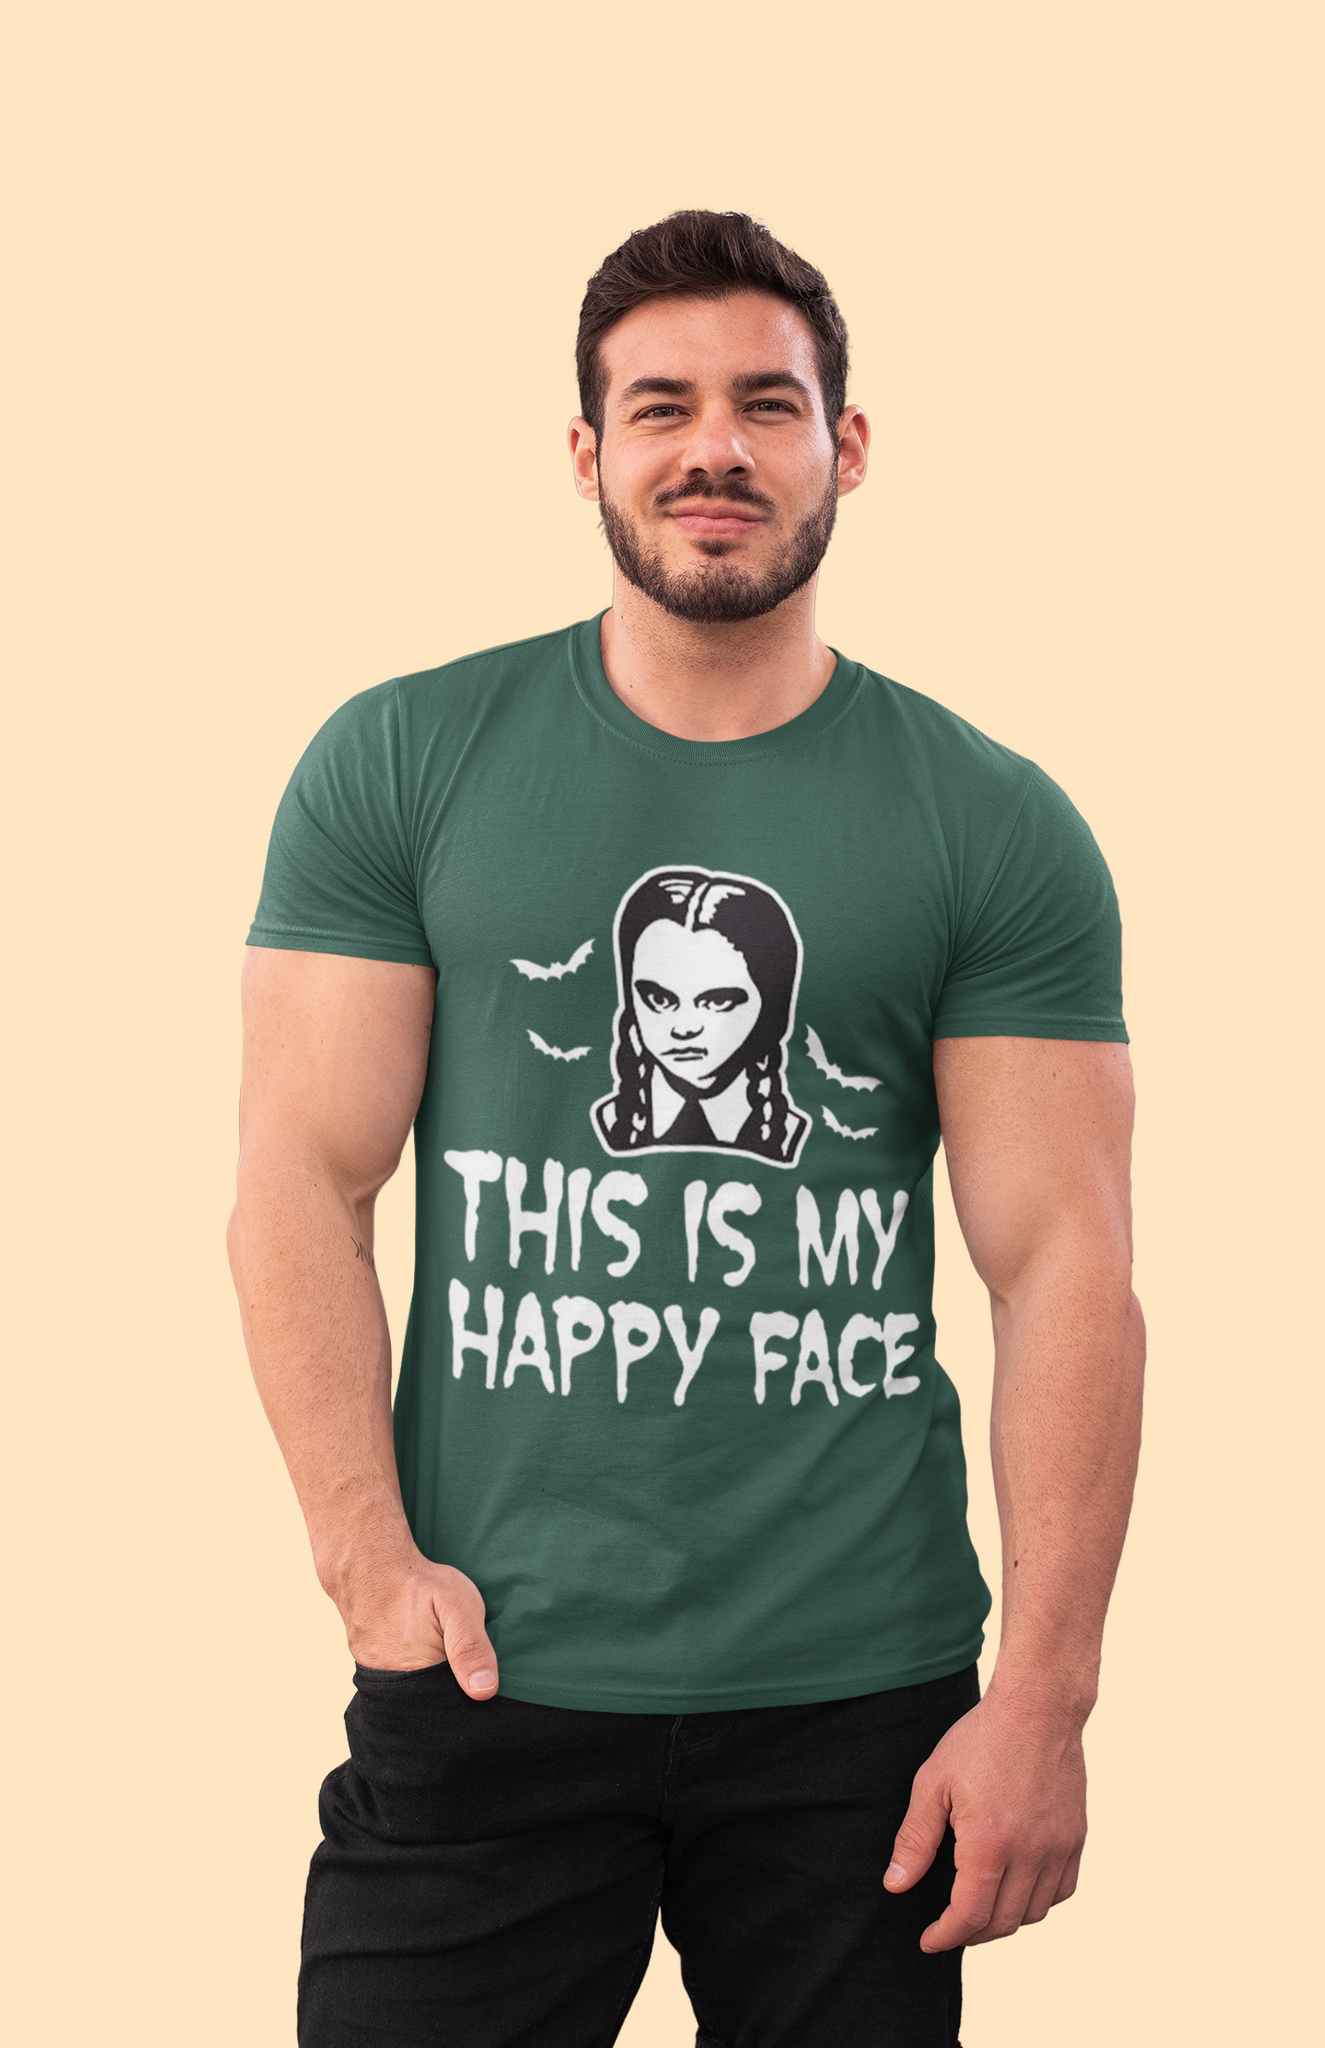 Addams Family T Shirt, Wednesday Addams T Shirt, This Is My Happy Face Tshirt, Halloween Gifts